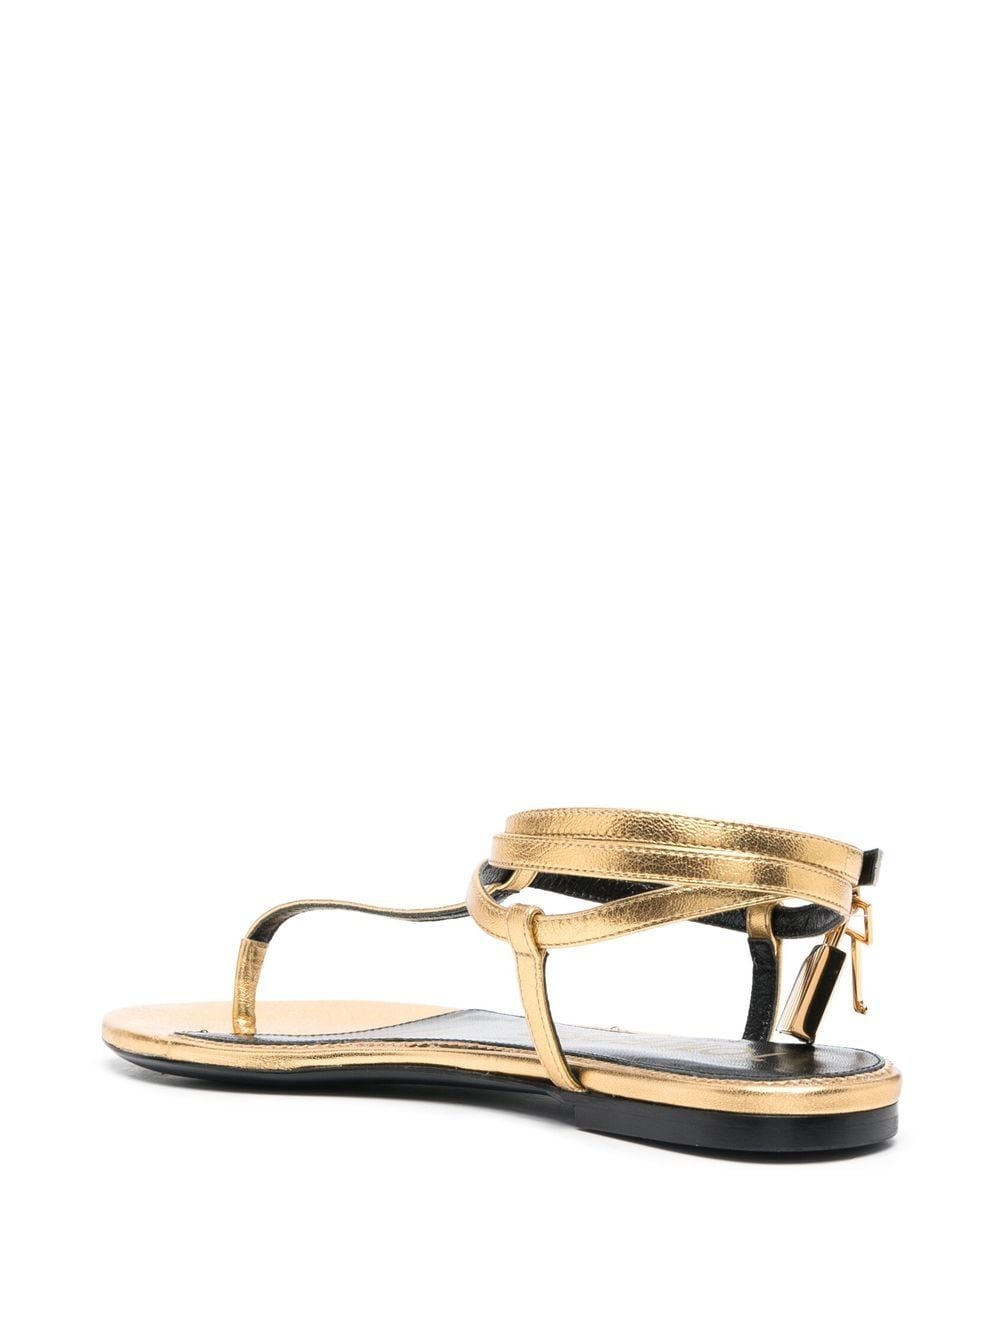 TOM FORD Luxury Gold-Tone Thong Strap Sandals for Women